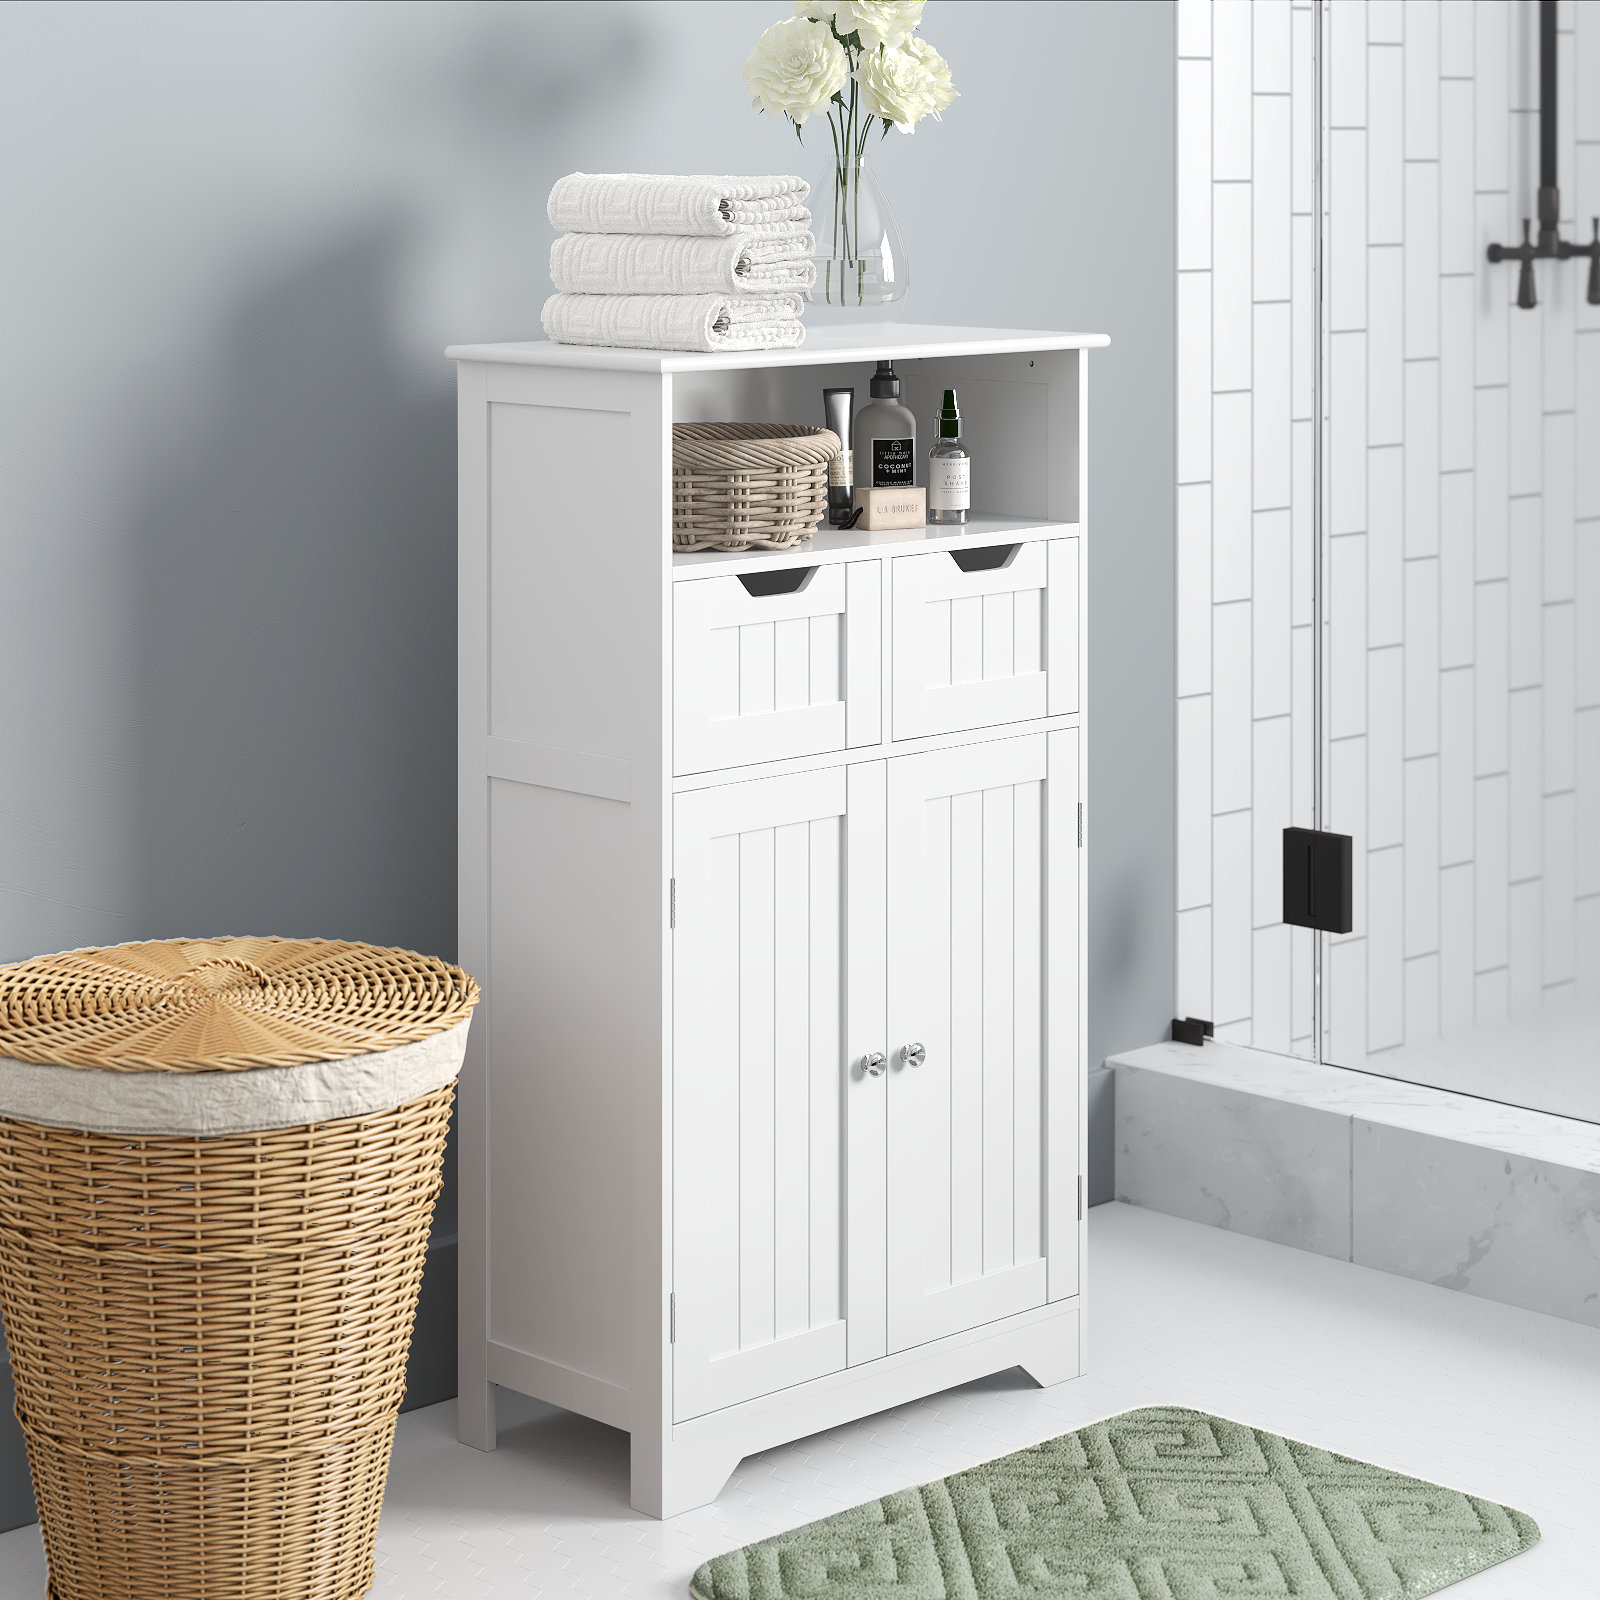 Gorgeous Bathroom Cabinet  Joanna's Collections - Country Home Basketry